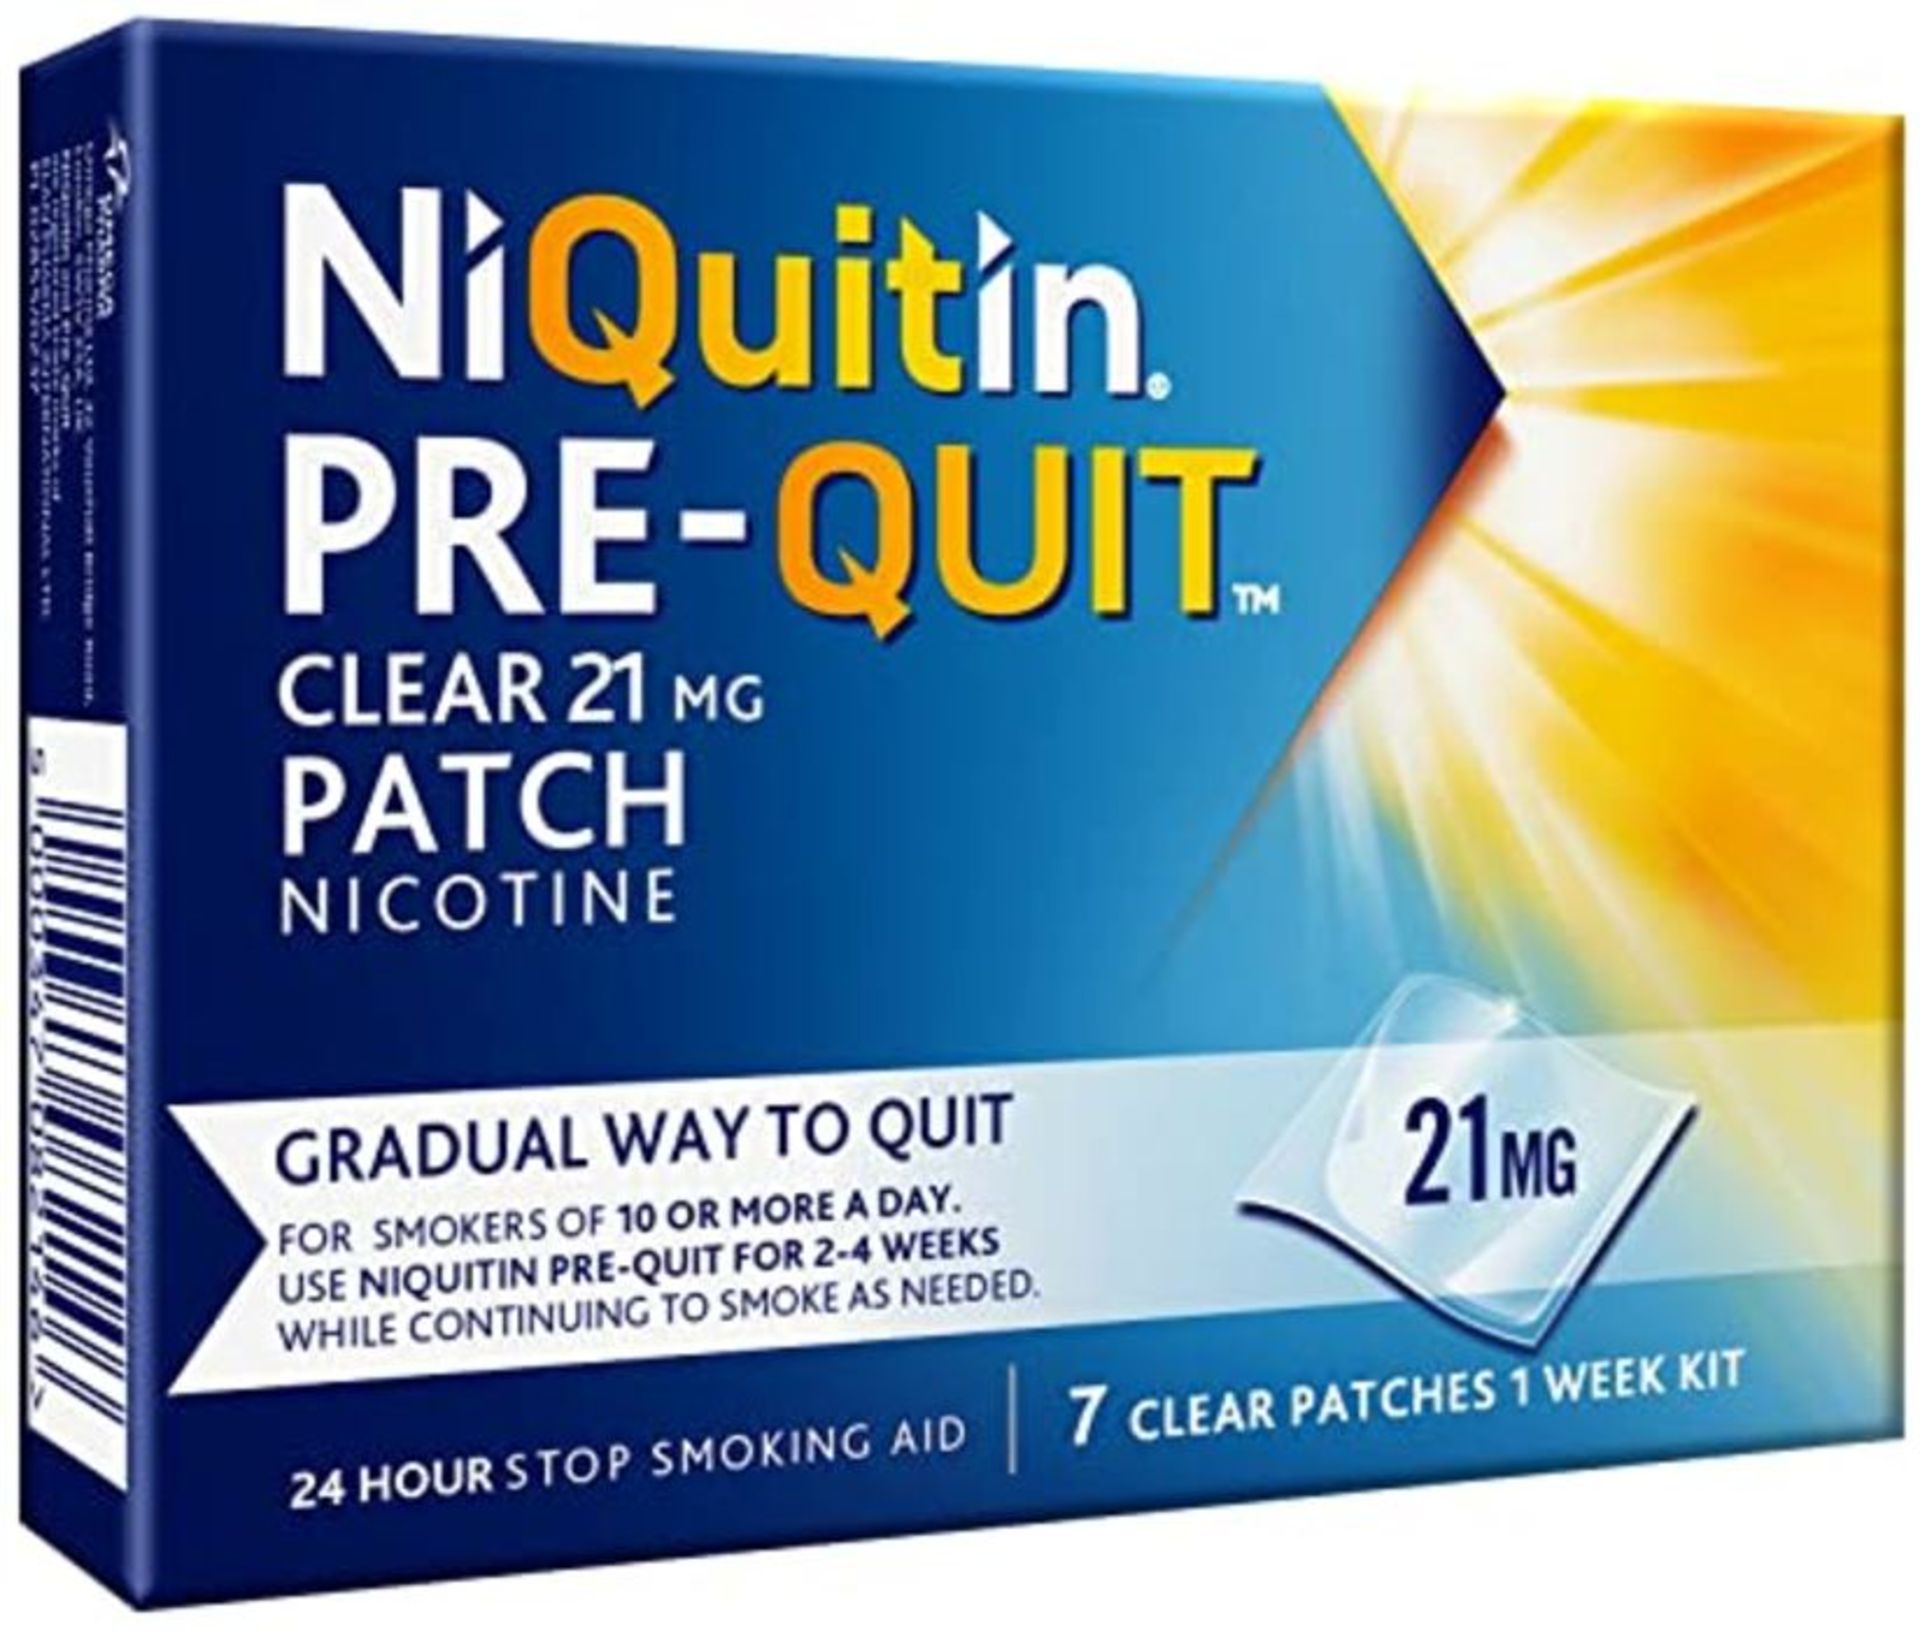 NiQuitin Clear Pre-Quit Patch - 21mg, 7 Nicotine Patches - Stop Smoking Aid